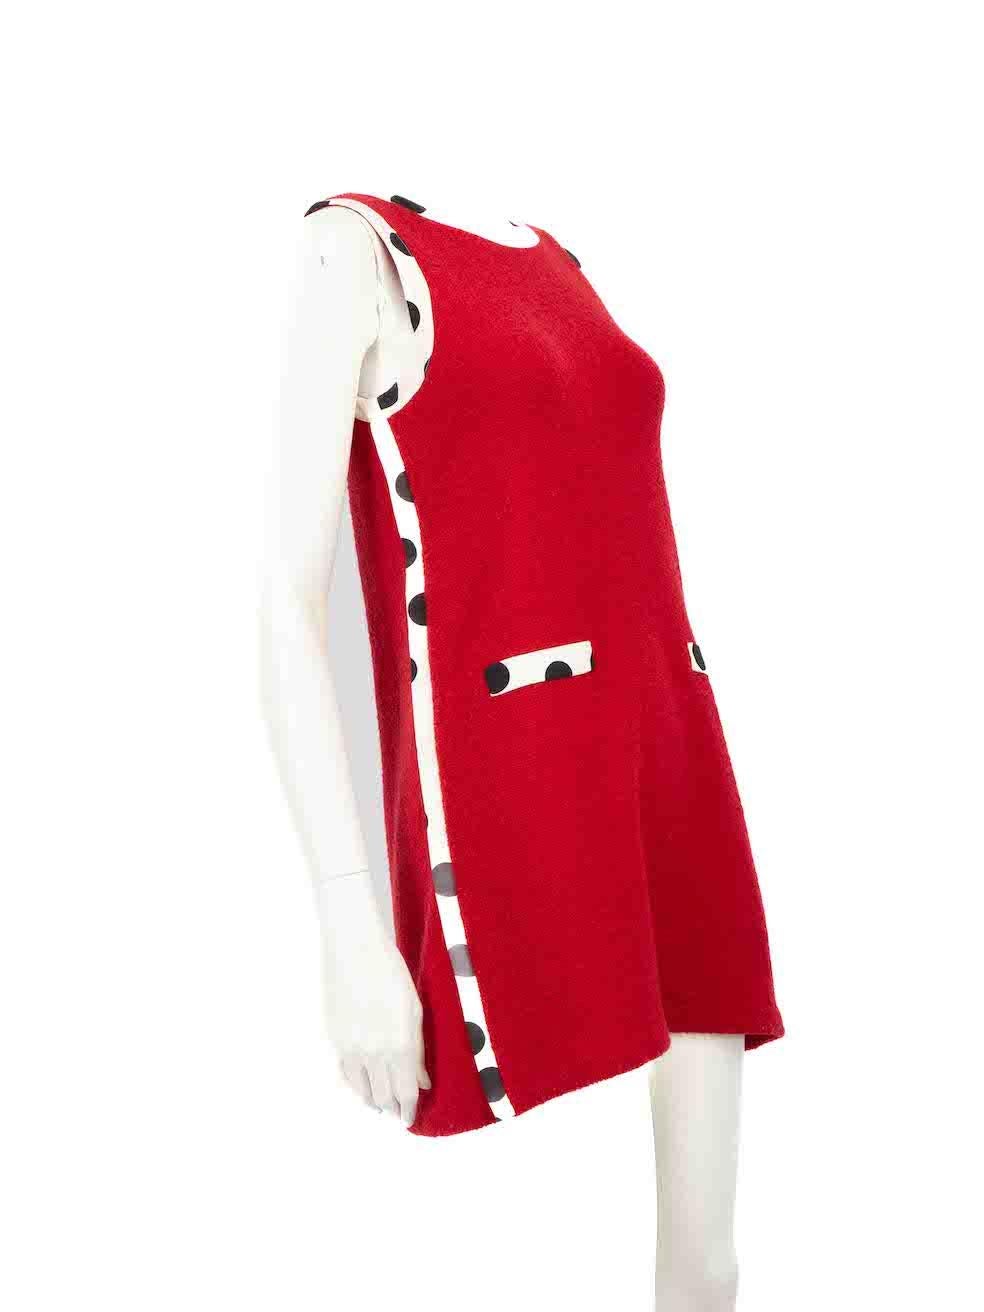 CONDITION is Very good. Minimal wear to dress is evident. Minimal wear to the dress is seen with overall piling on this used Boutique Moschino designer resale item.
 
 
 
 Details
 
 
 Red
 
 Wool
 
 Knit dress
 
 Mini
 
 Sleeveless
 
 Polkadot